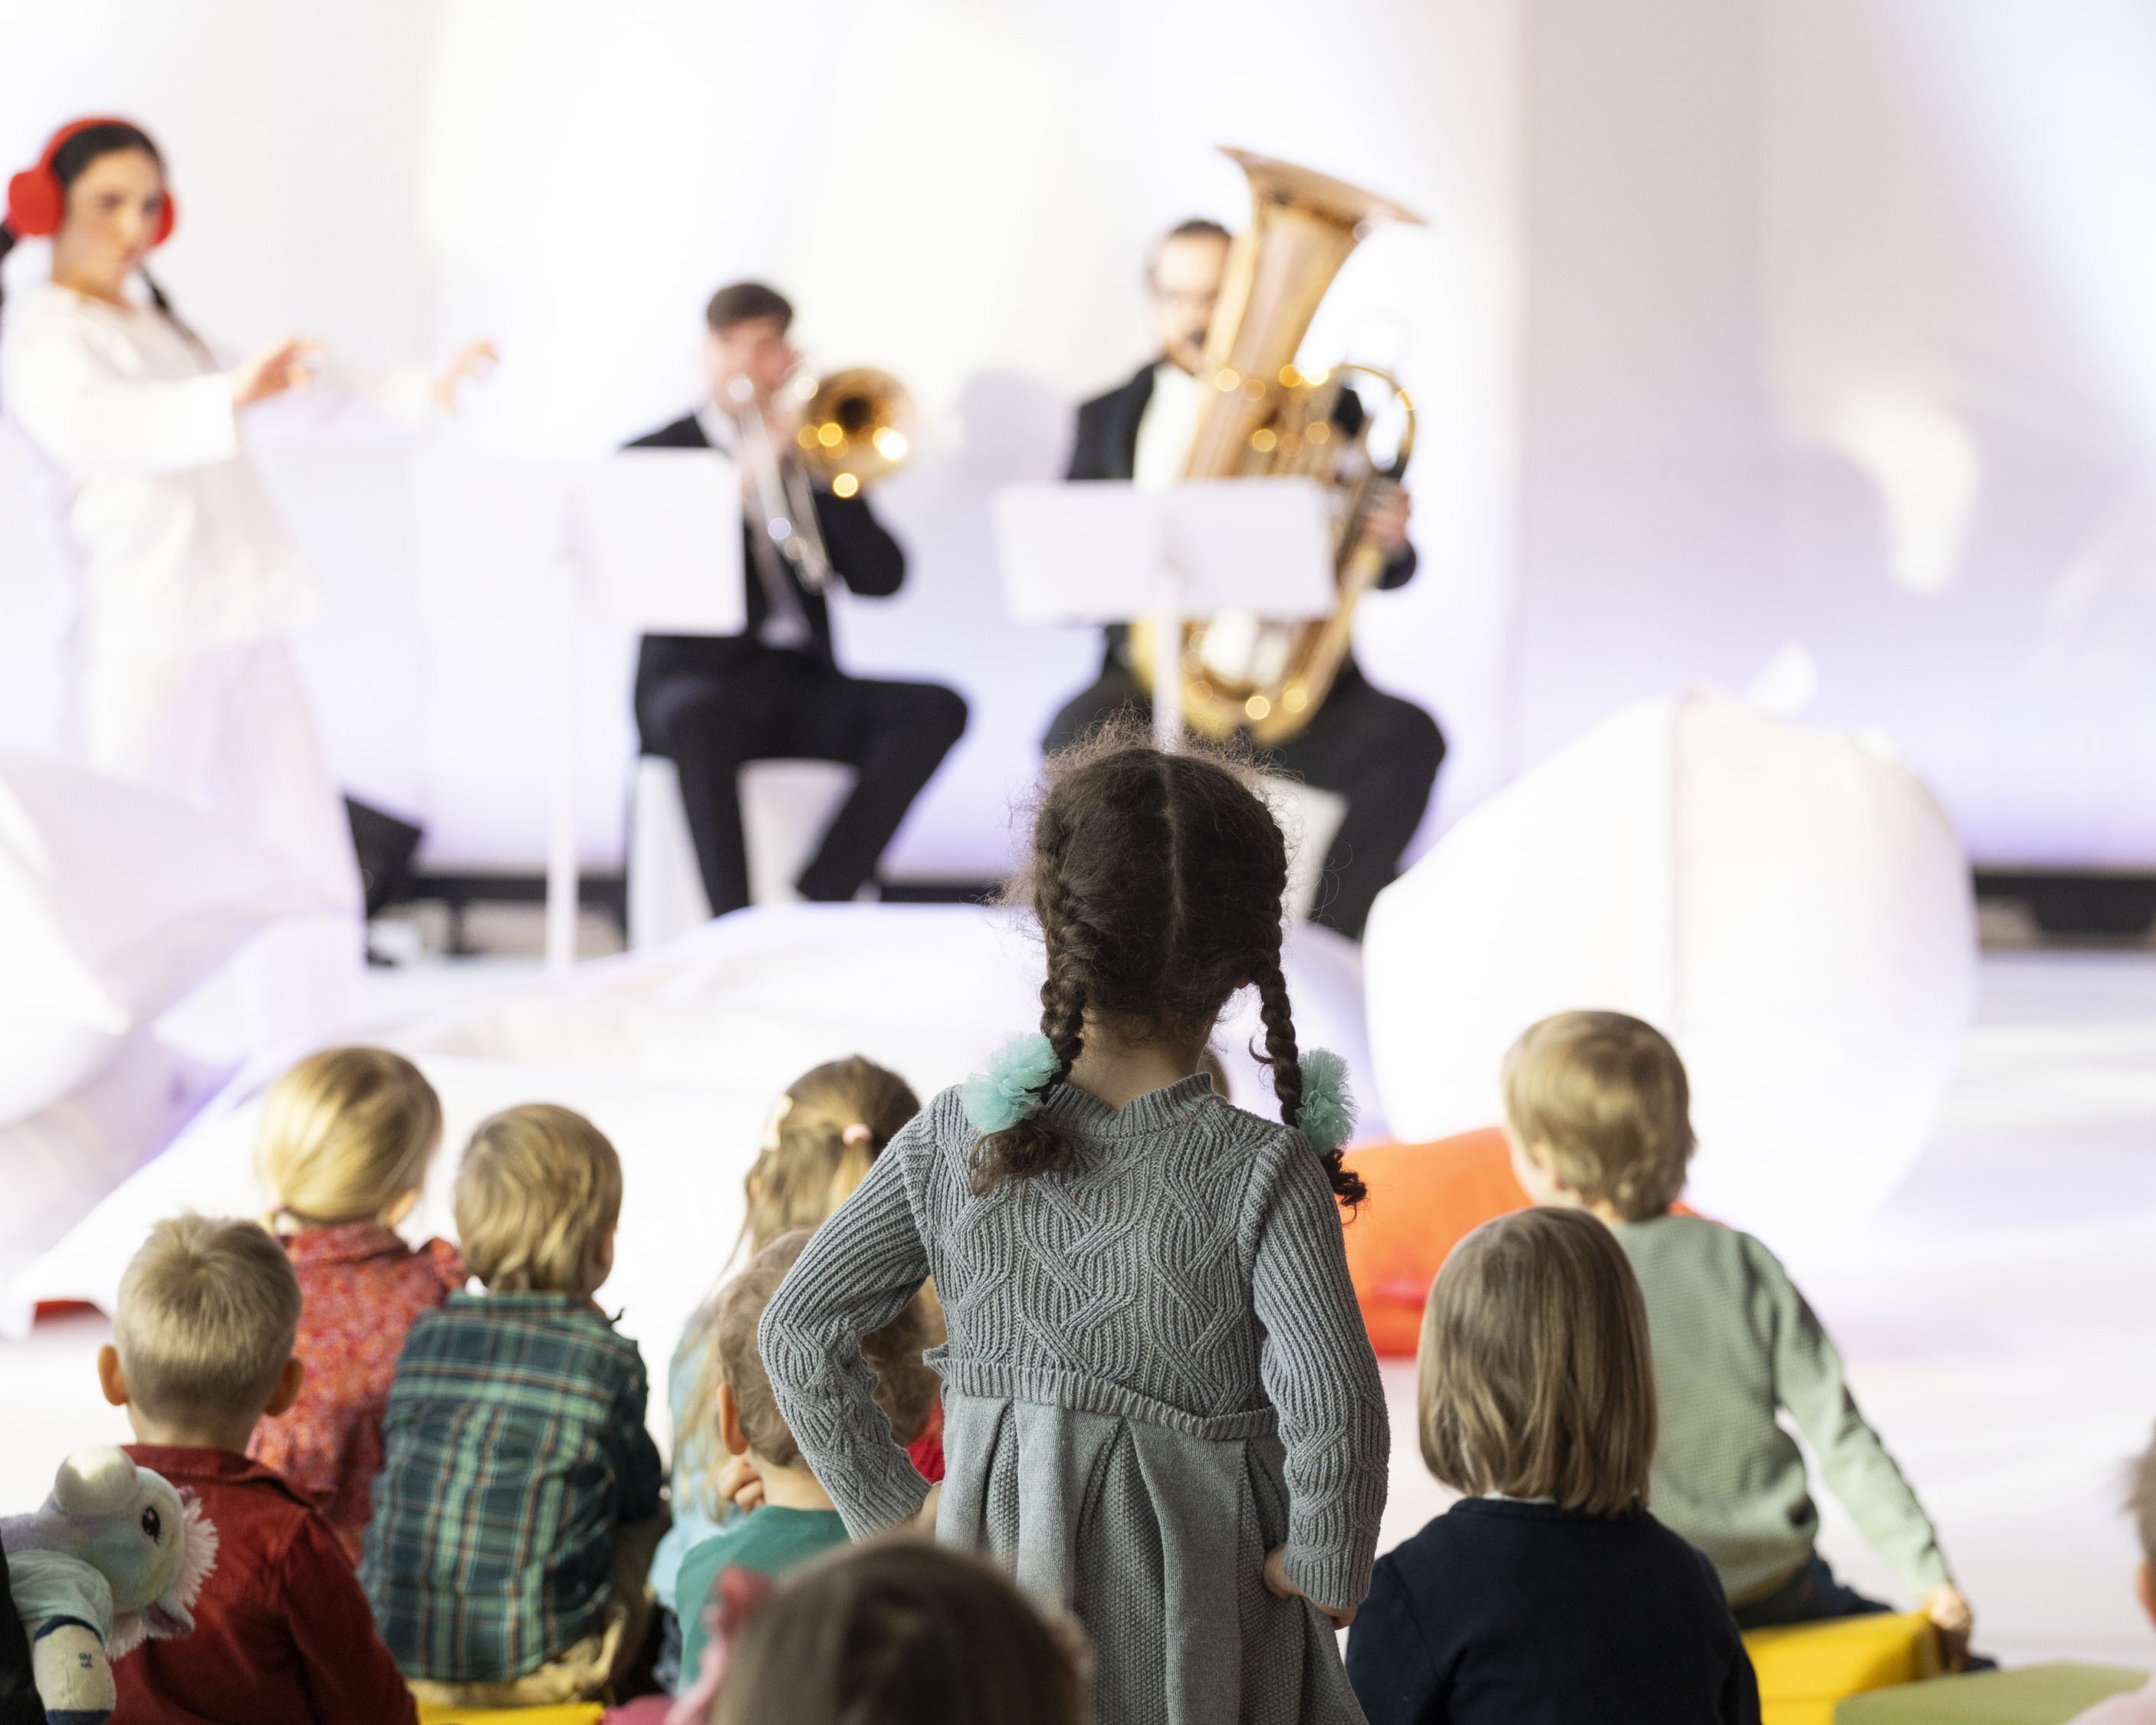 Children in the audience, two musicians playing music, two women in white suits